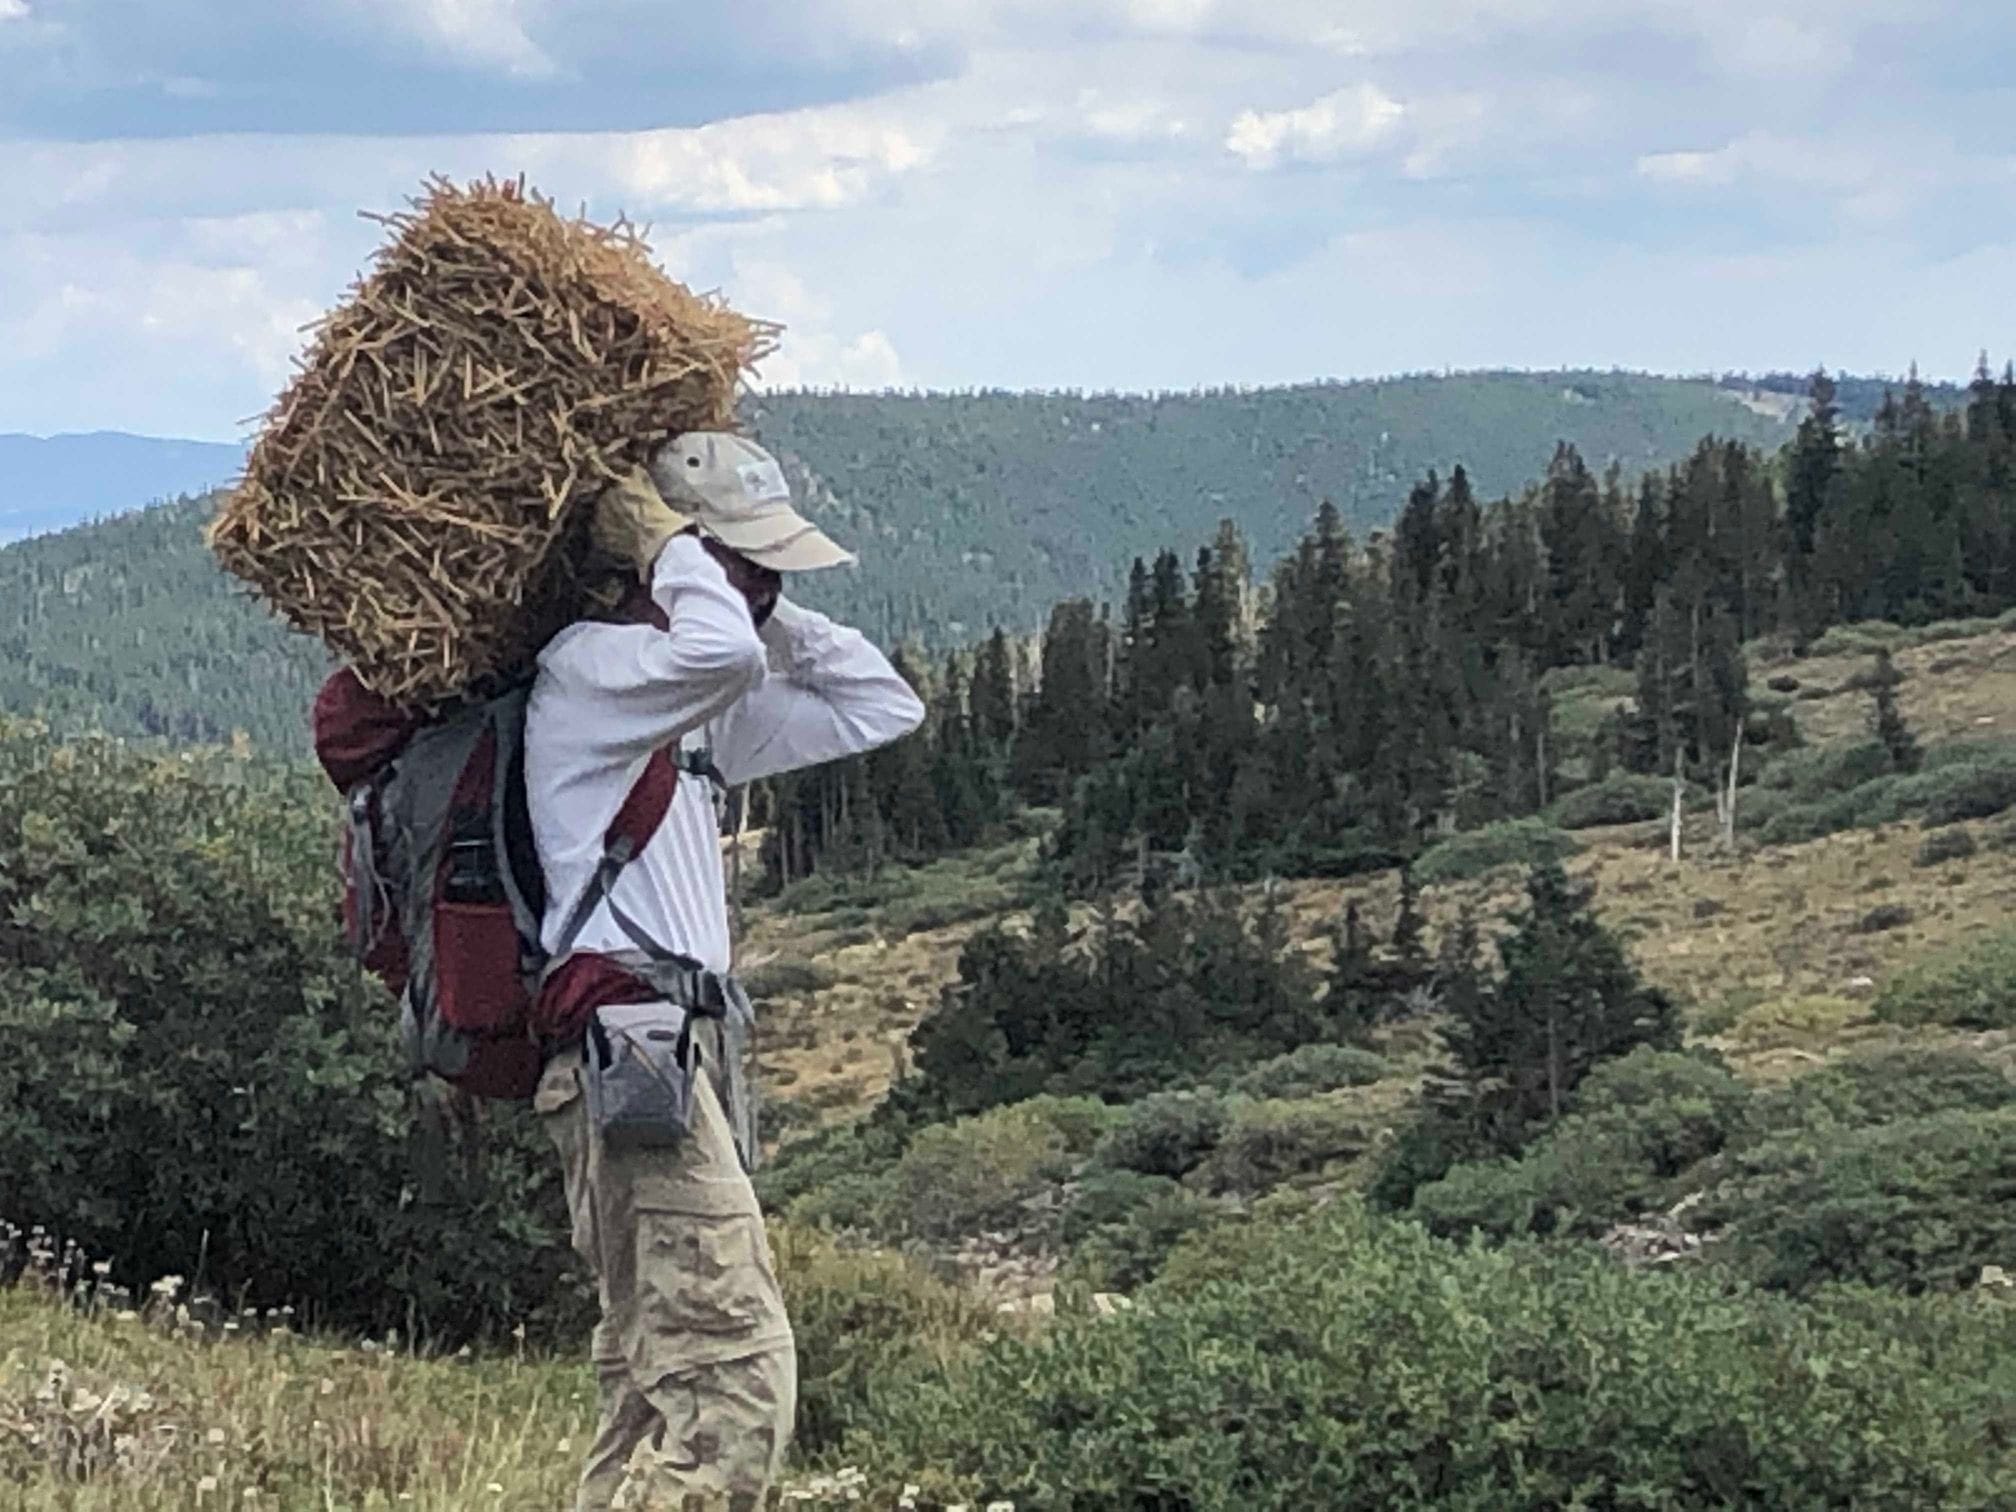 Man carrying a bale of straw on his back in forested area